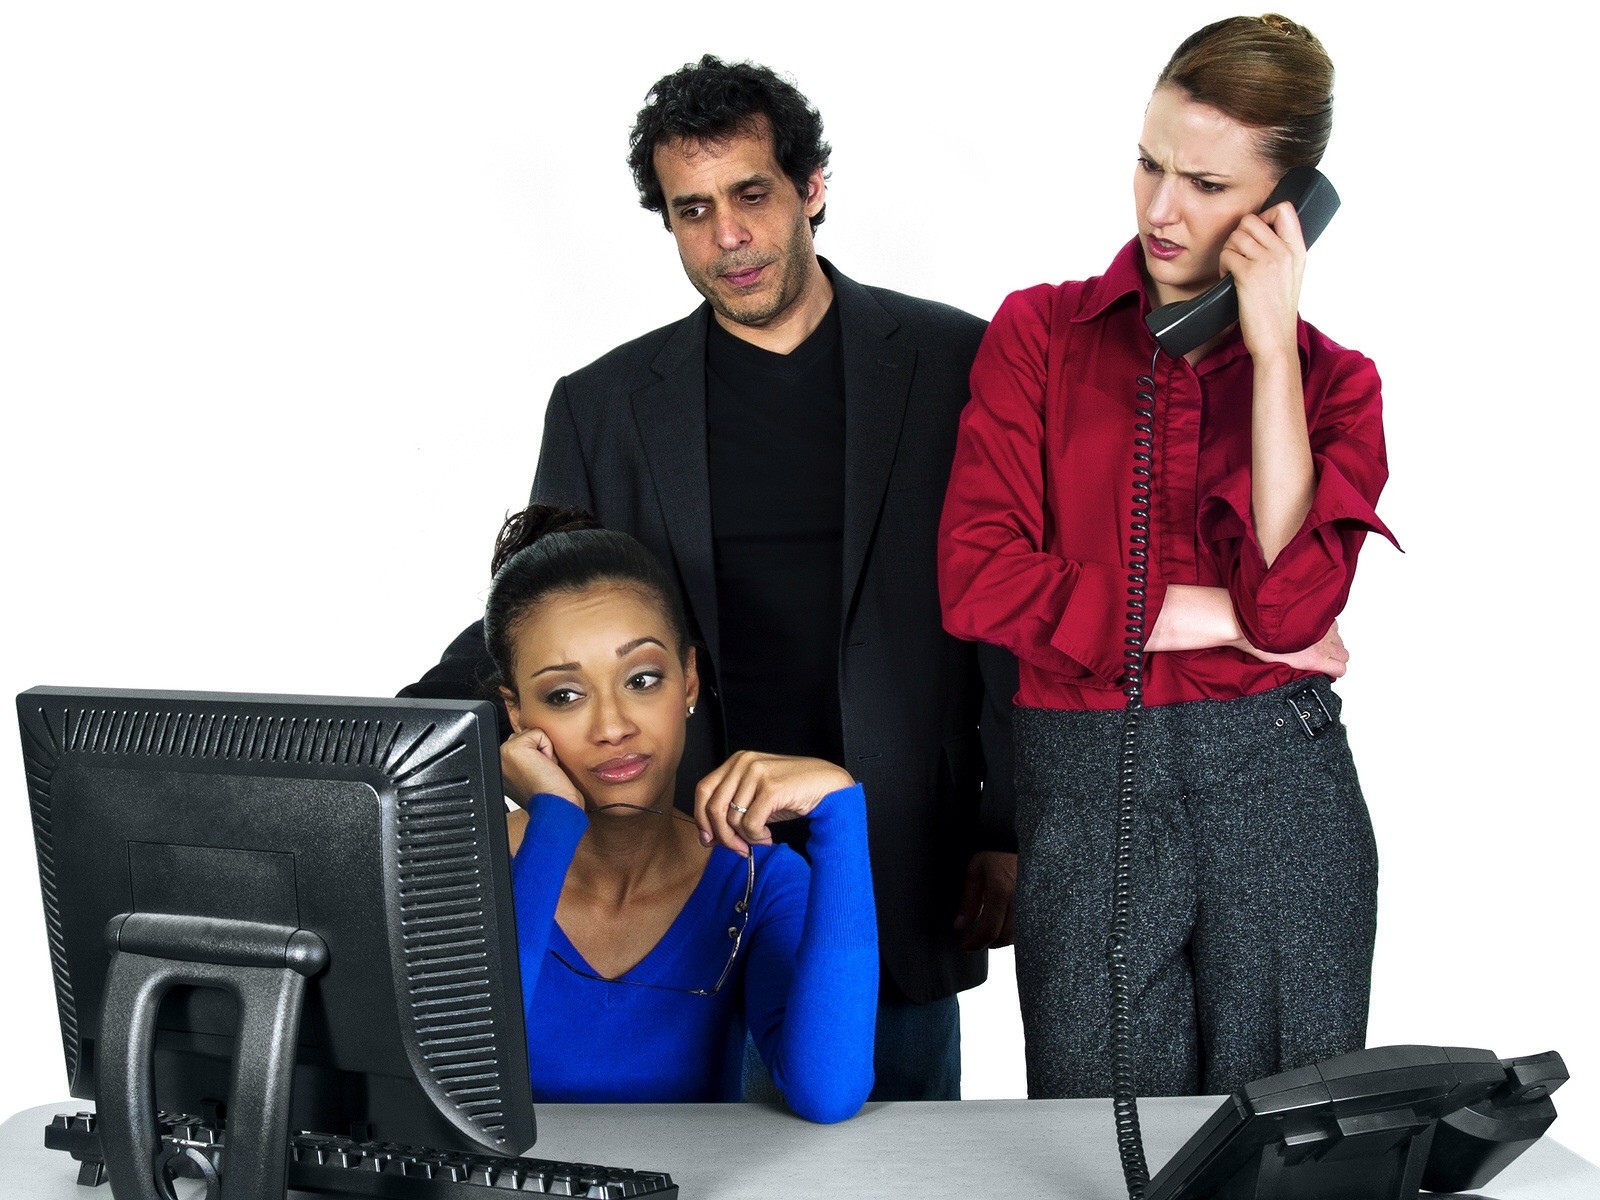 When to Tell Your Boss About Coworkers’ Misbehaviors